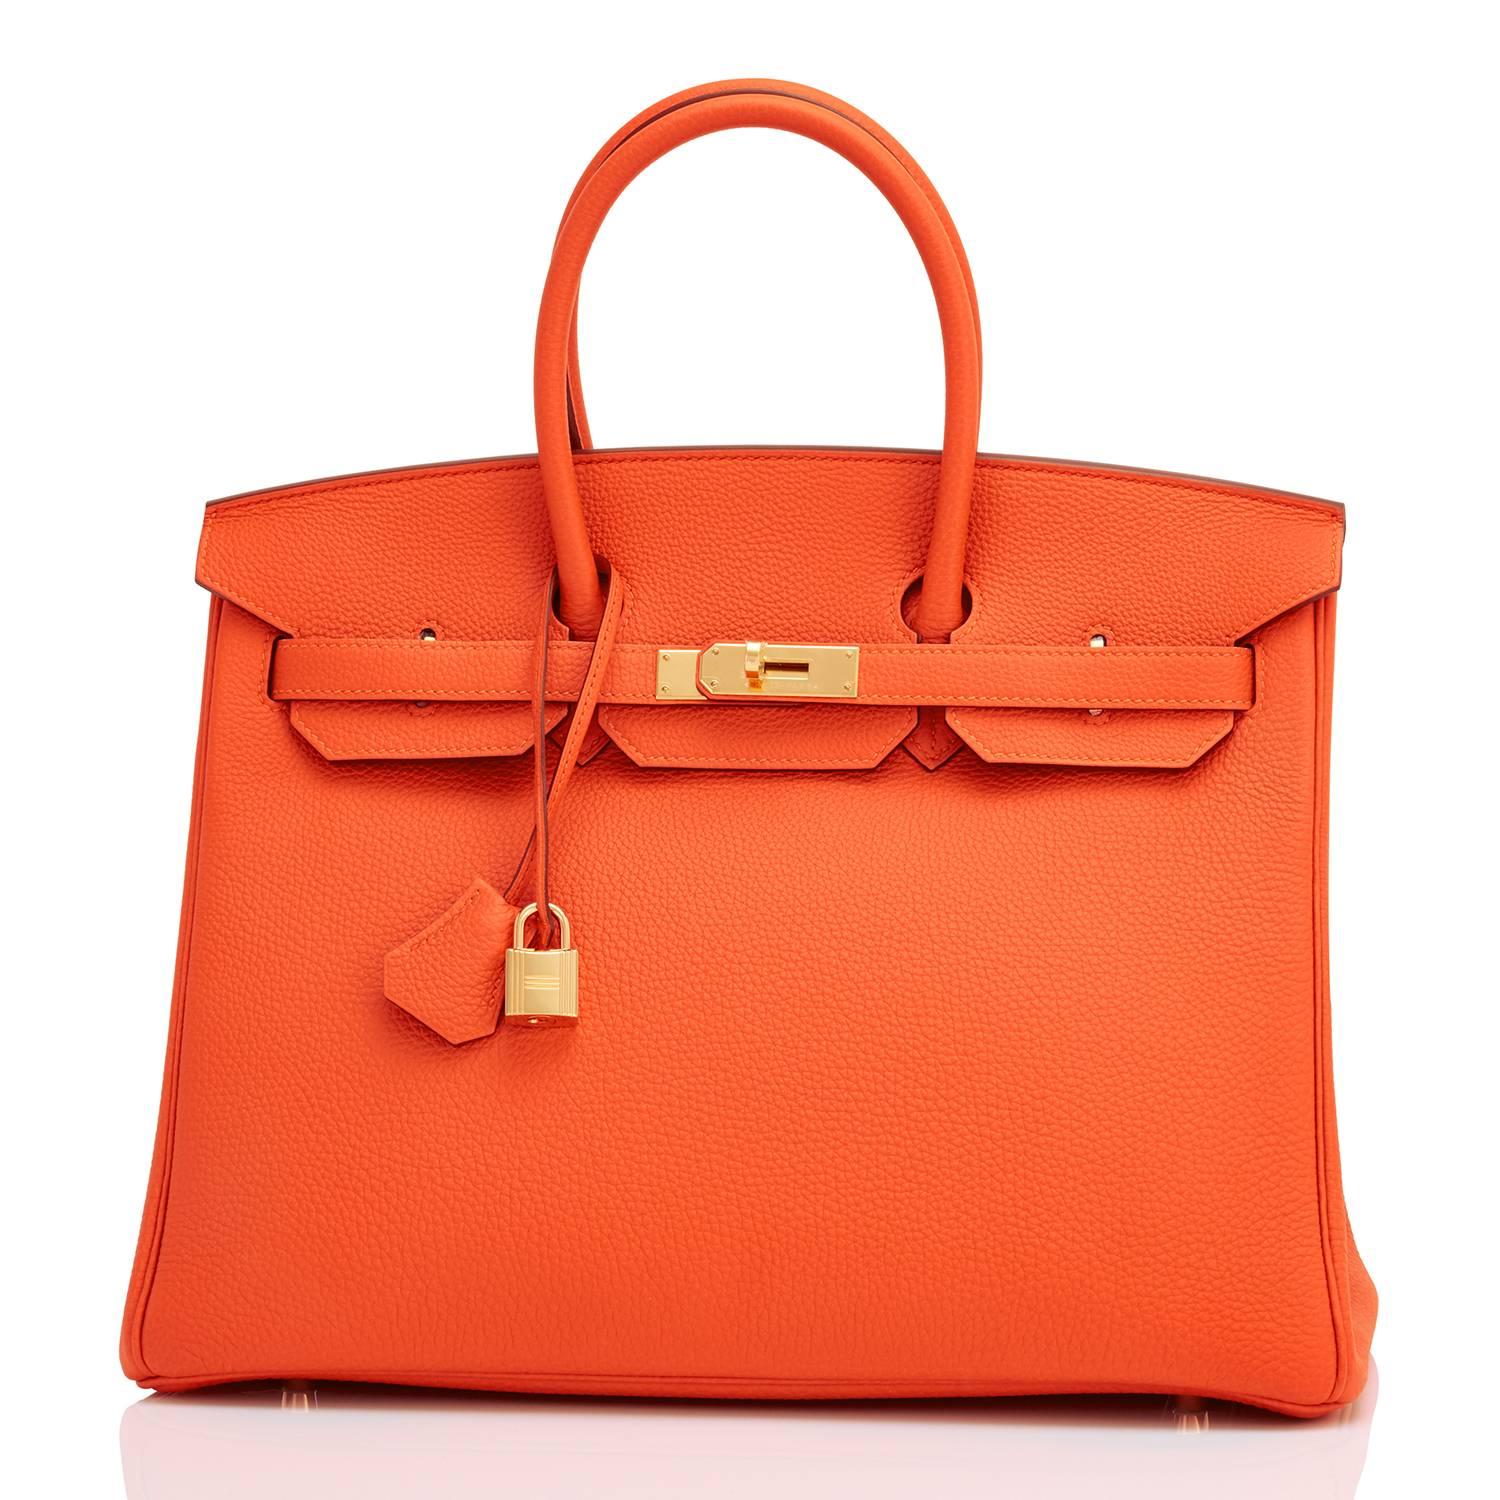 Hermes Classic Orange 35cm Birkin Bag Gold Hardware 
Extremely rare find in Pristine Condition (with plastic on hardware). 
Perfect gift! Comes in full set with lock, keys, clochette, sleeper, raincoat, and Hermes box. 
This is the highly coveted